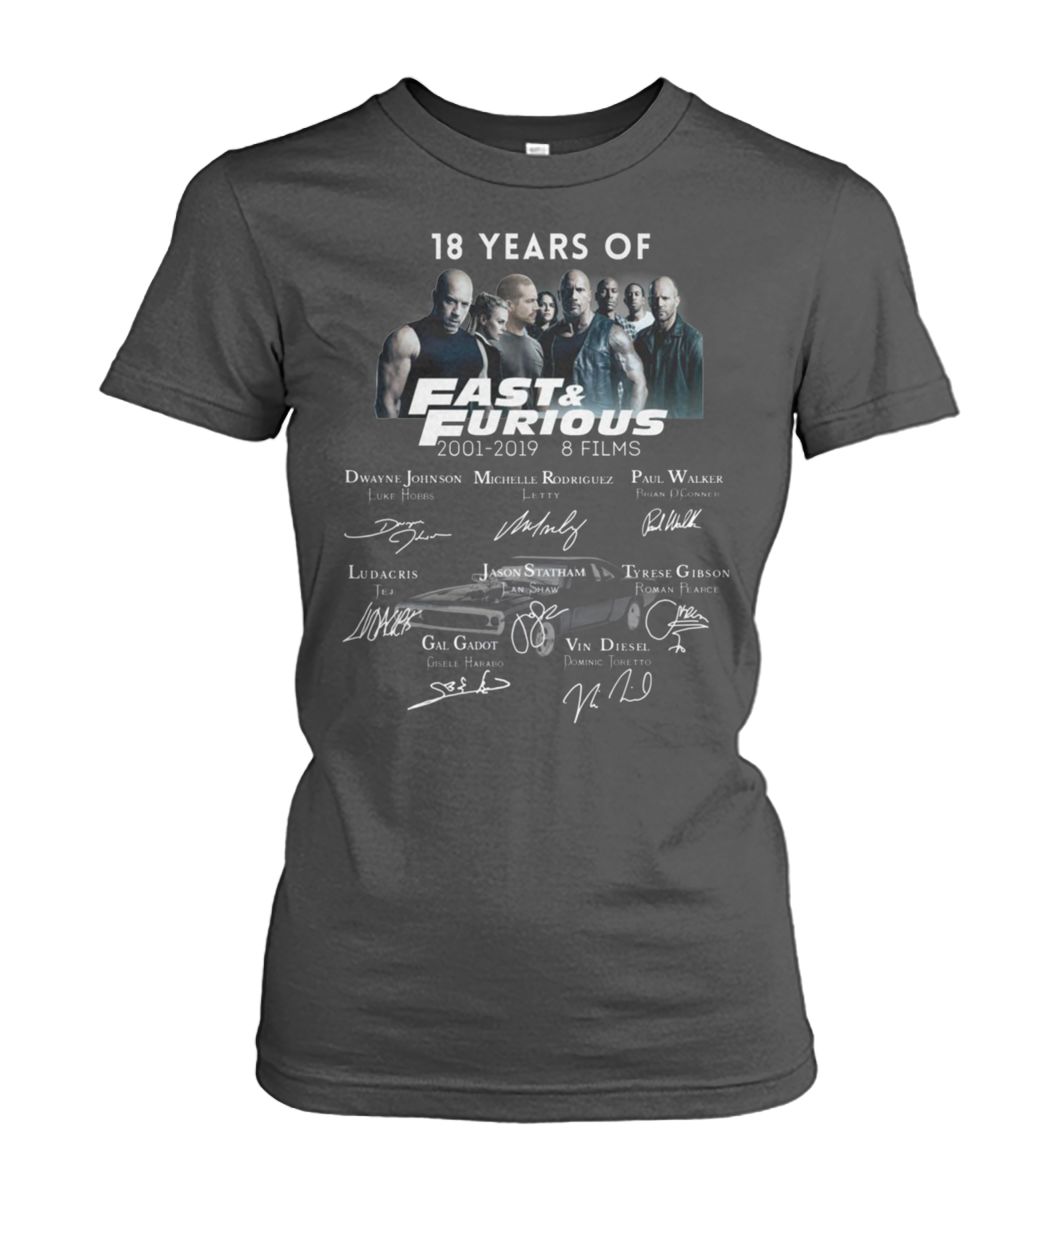 18 years of fast and furious 2001 2019 8 films women's crew tee